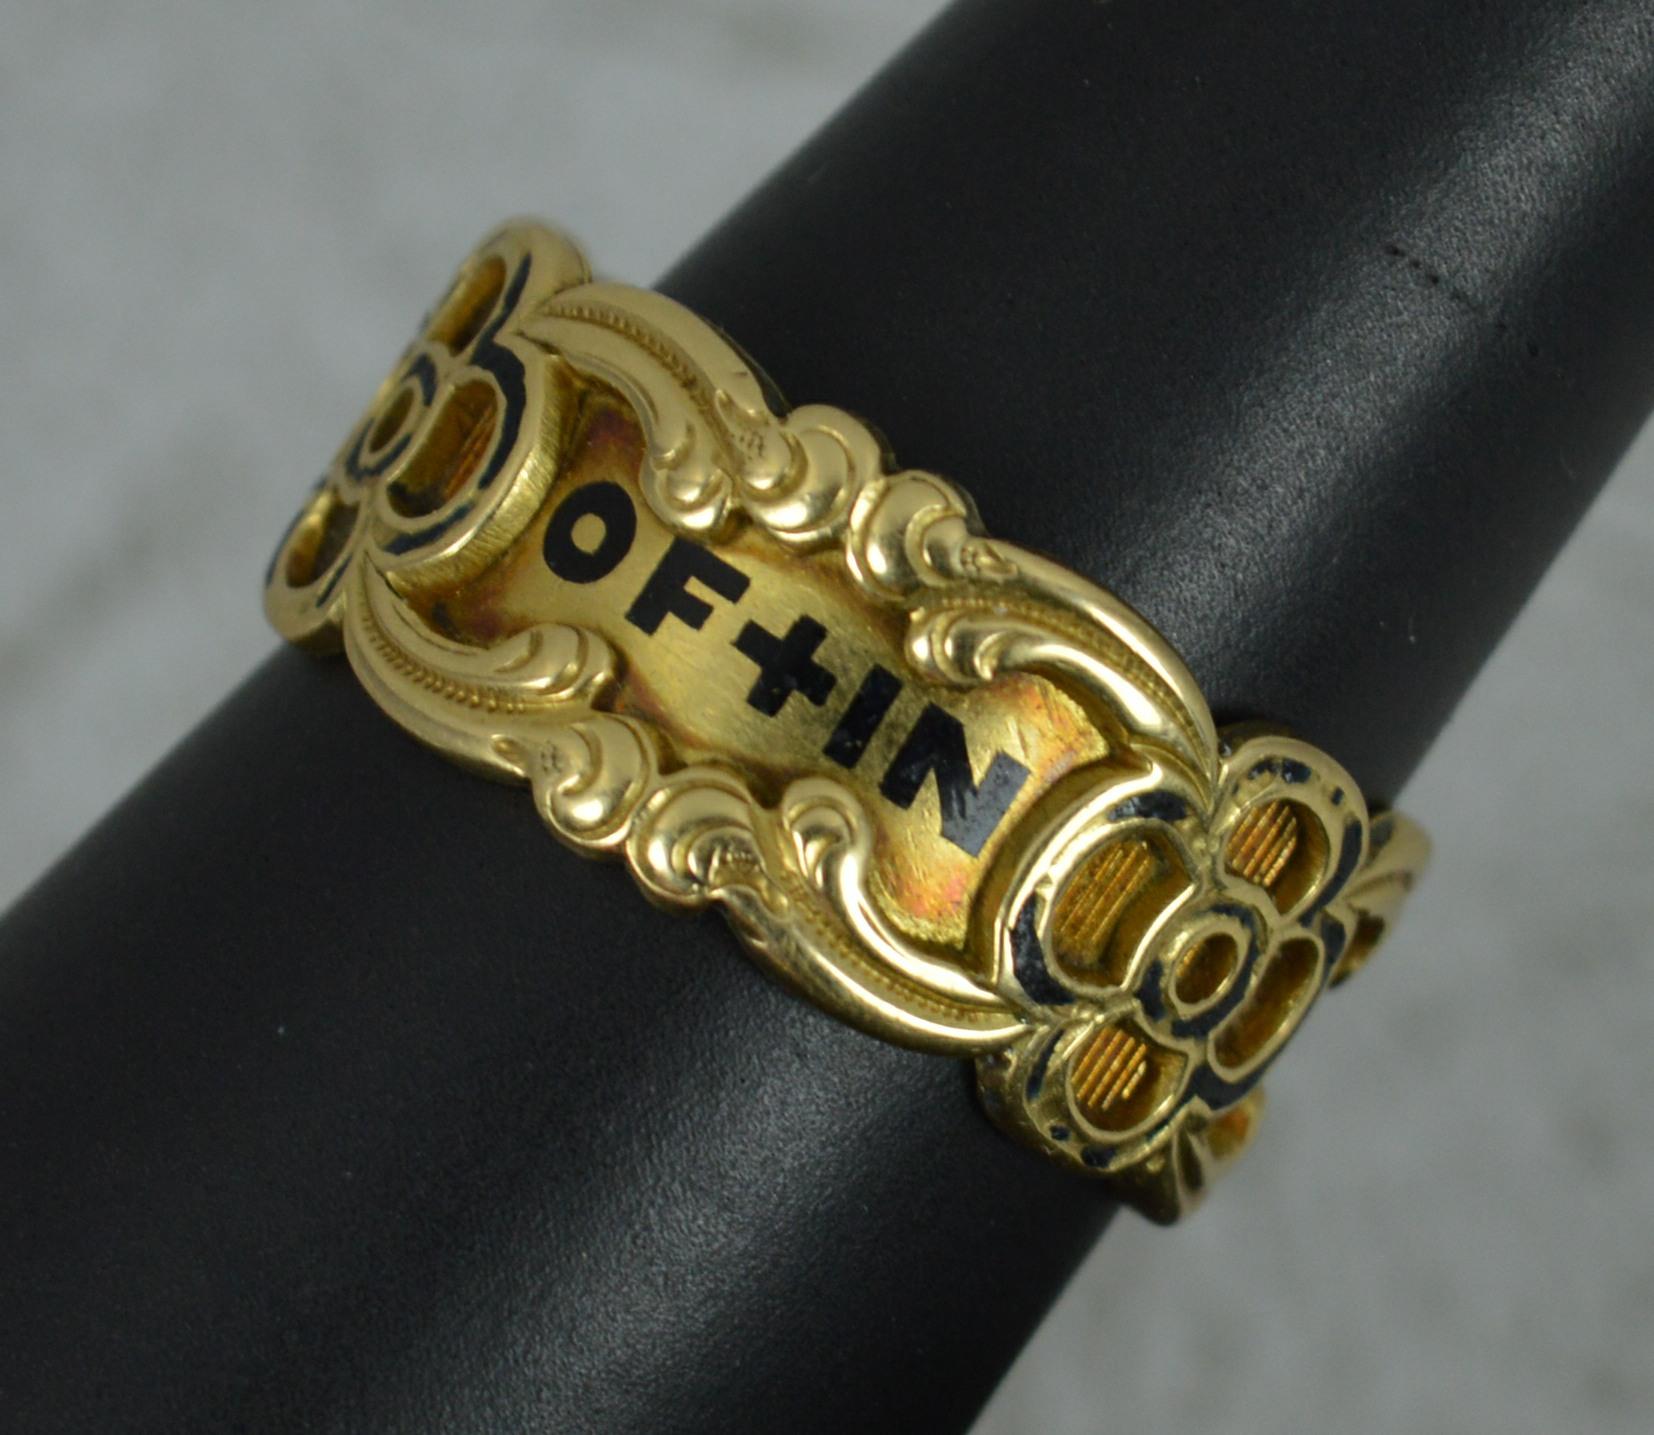 1842 Victorian 18 Carat Gold Enamel In Memory of Mourning Band Ring 6